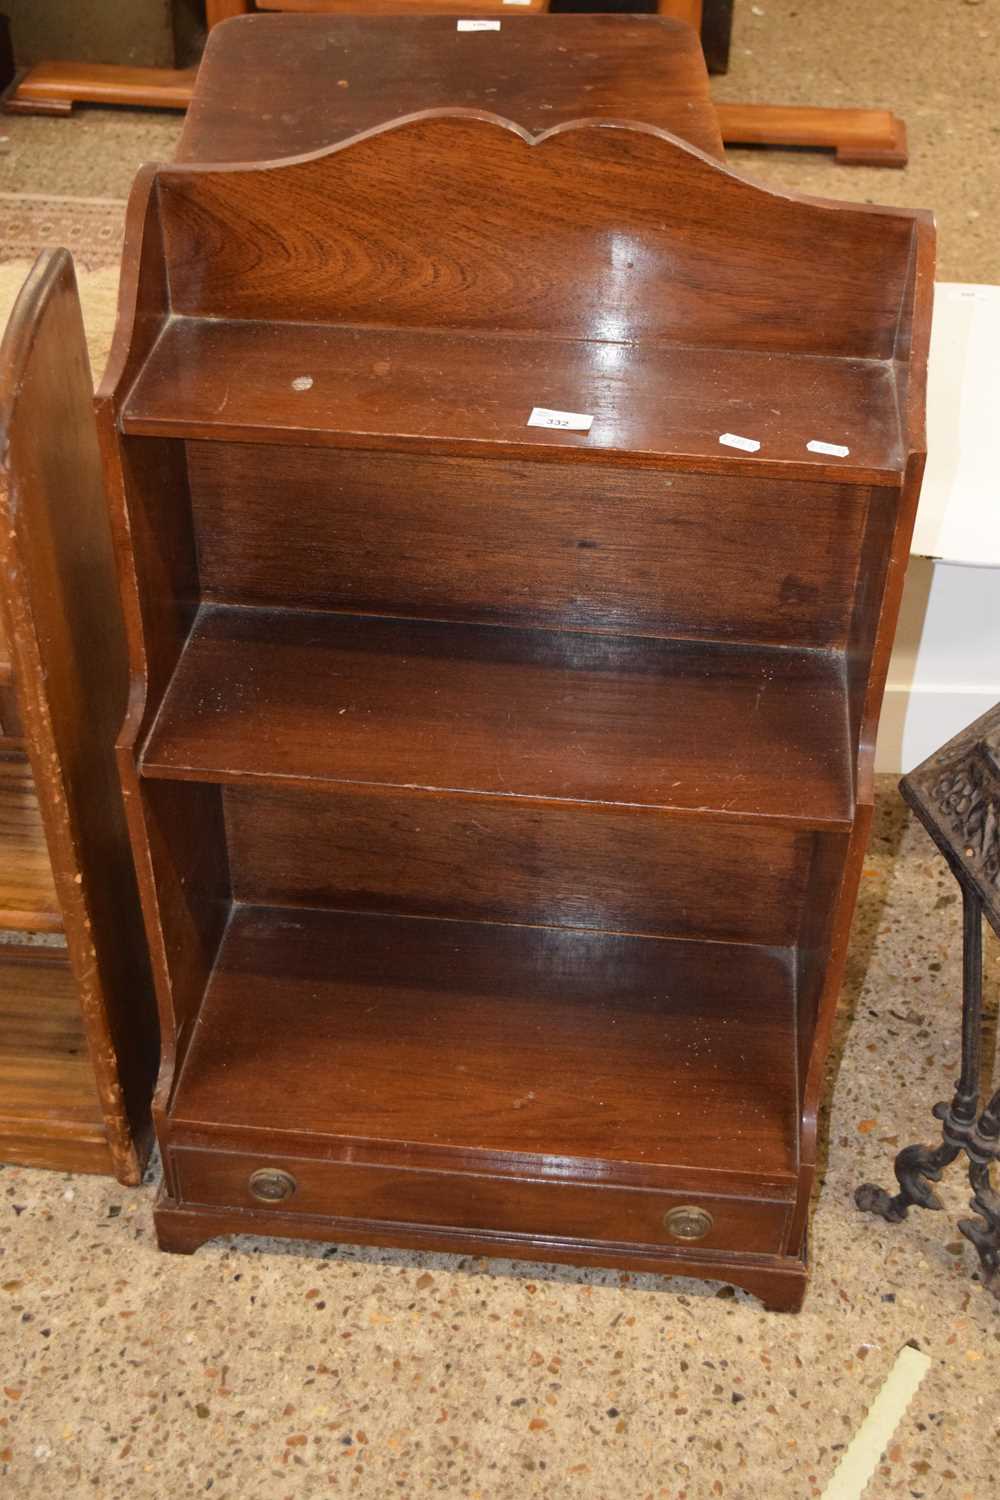 A reproduction mahogany veneered waterfall style small bookcase with base drawer